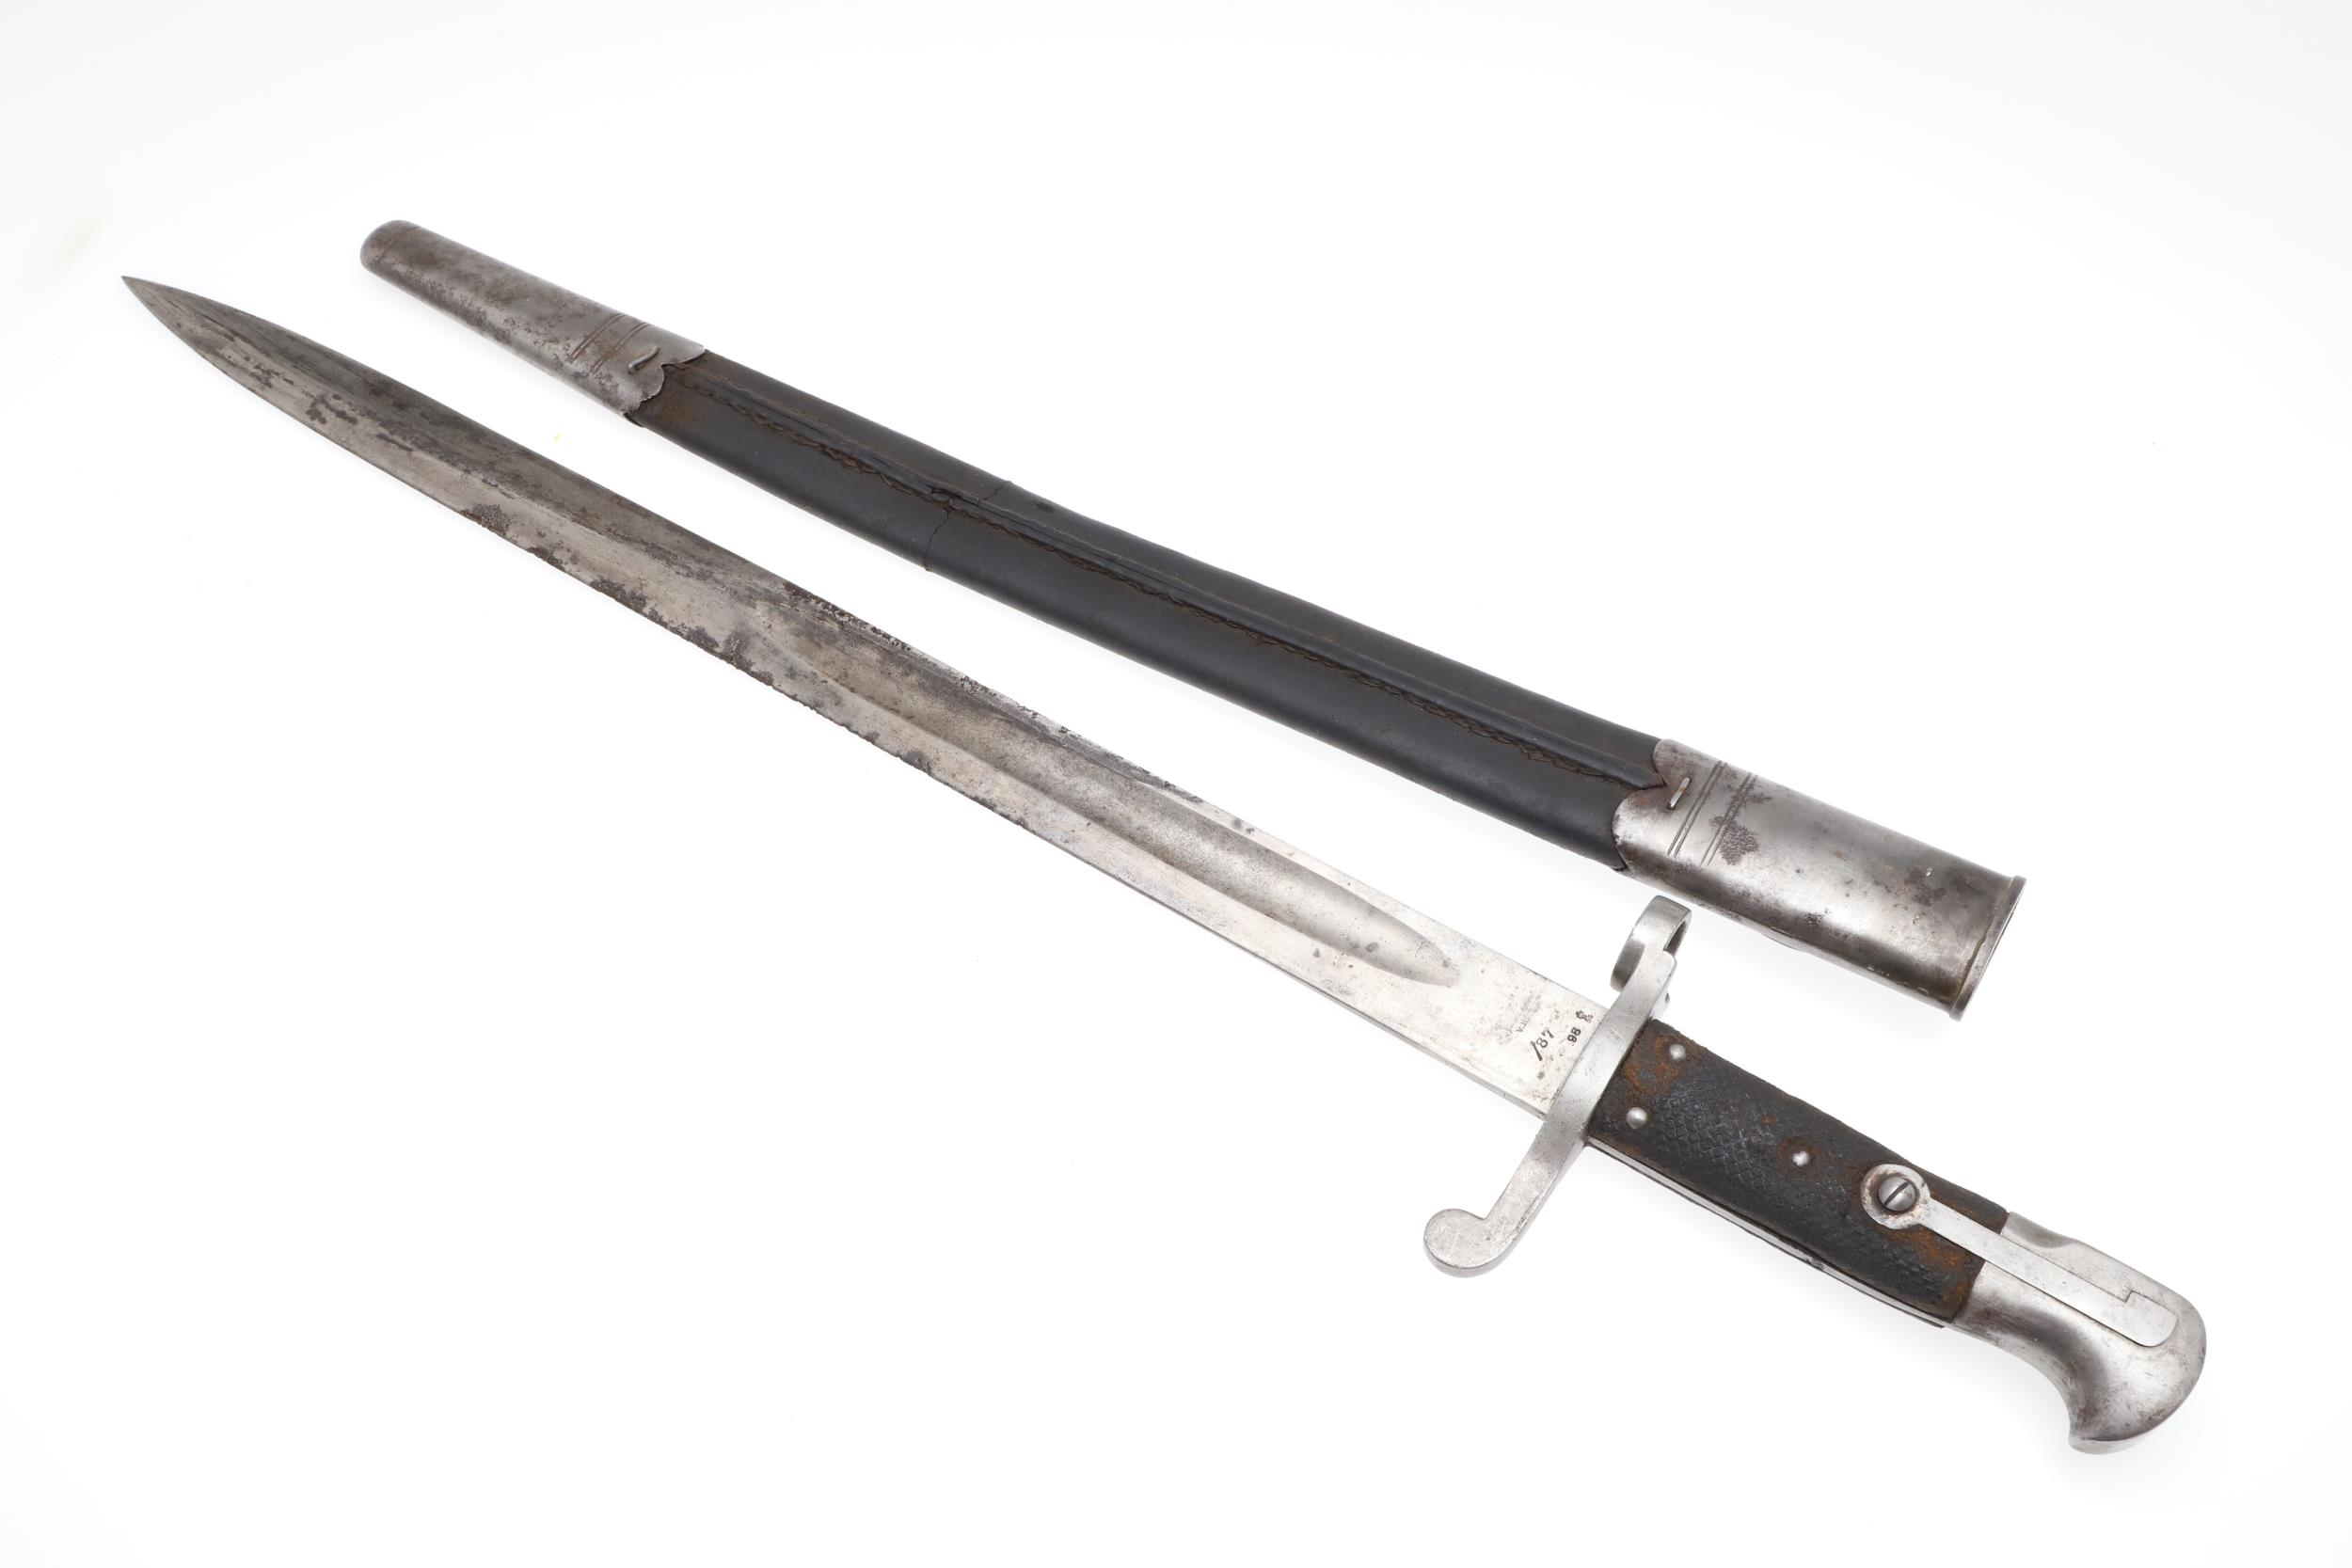 A VICTORIAN MARTINI HENRY 1887 PATTERN BAYONET AND SCABBARD. - Image 5 of 18